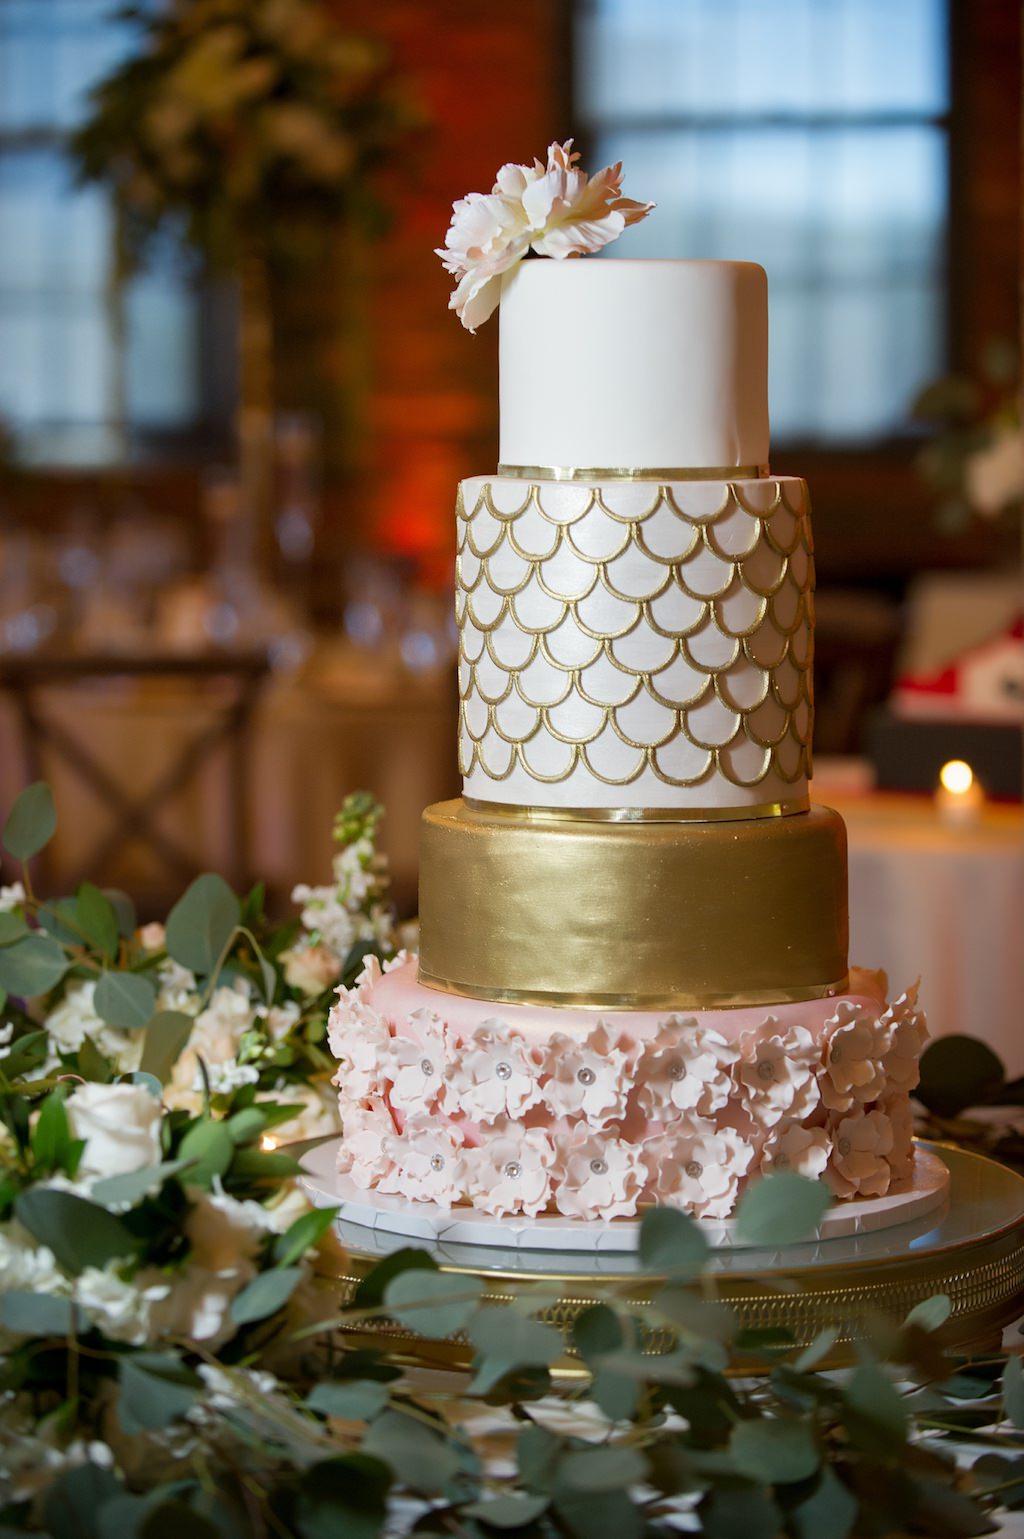 Four Tier Wedding Cake, Bottom Pink Sugar Floral Layer, Gold Painted Layer, Gold Design on White Cake Layer | Tampa Bay Wedding Photographer Andi Diamond Photography